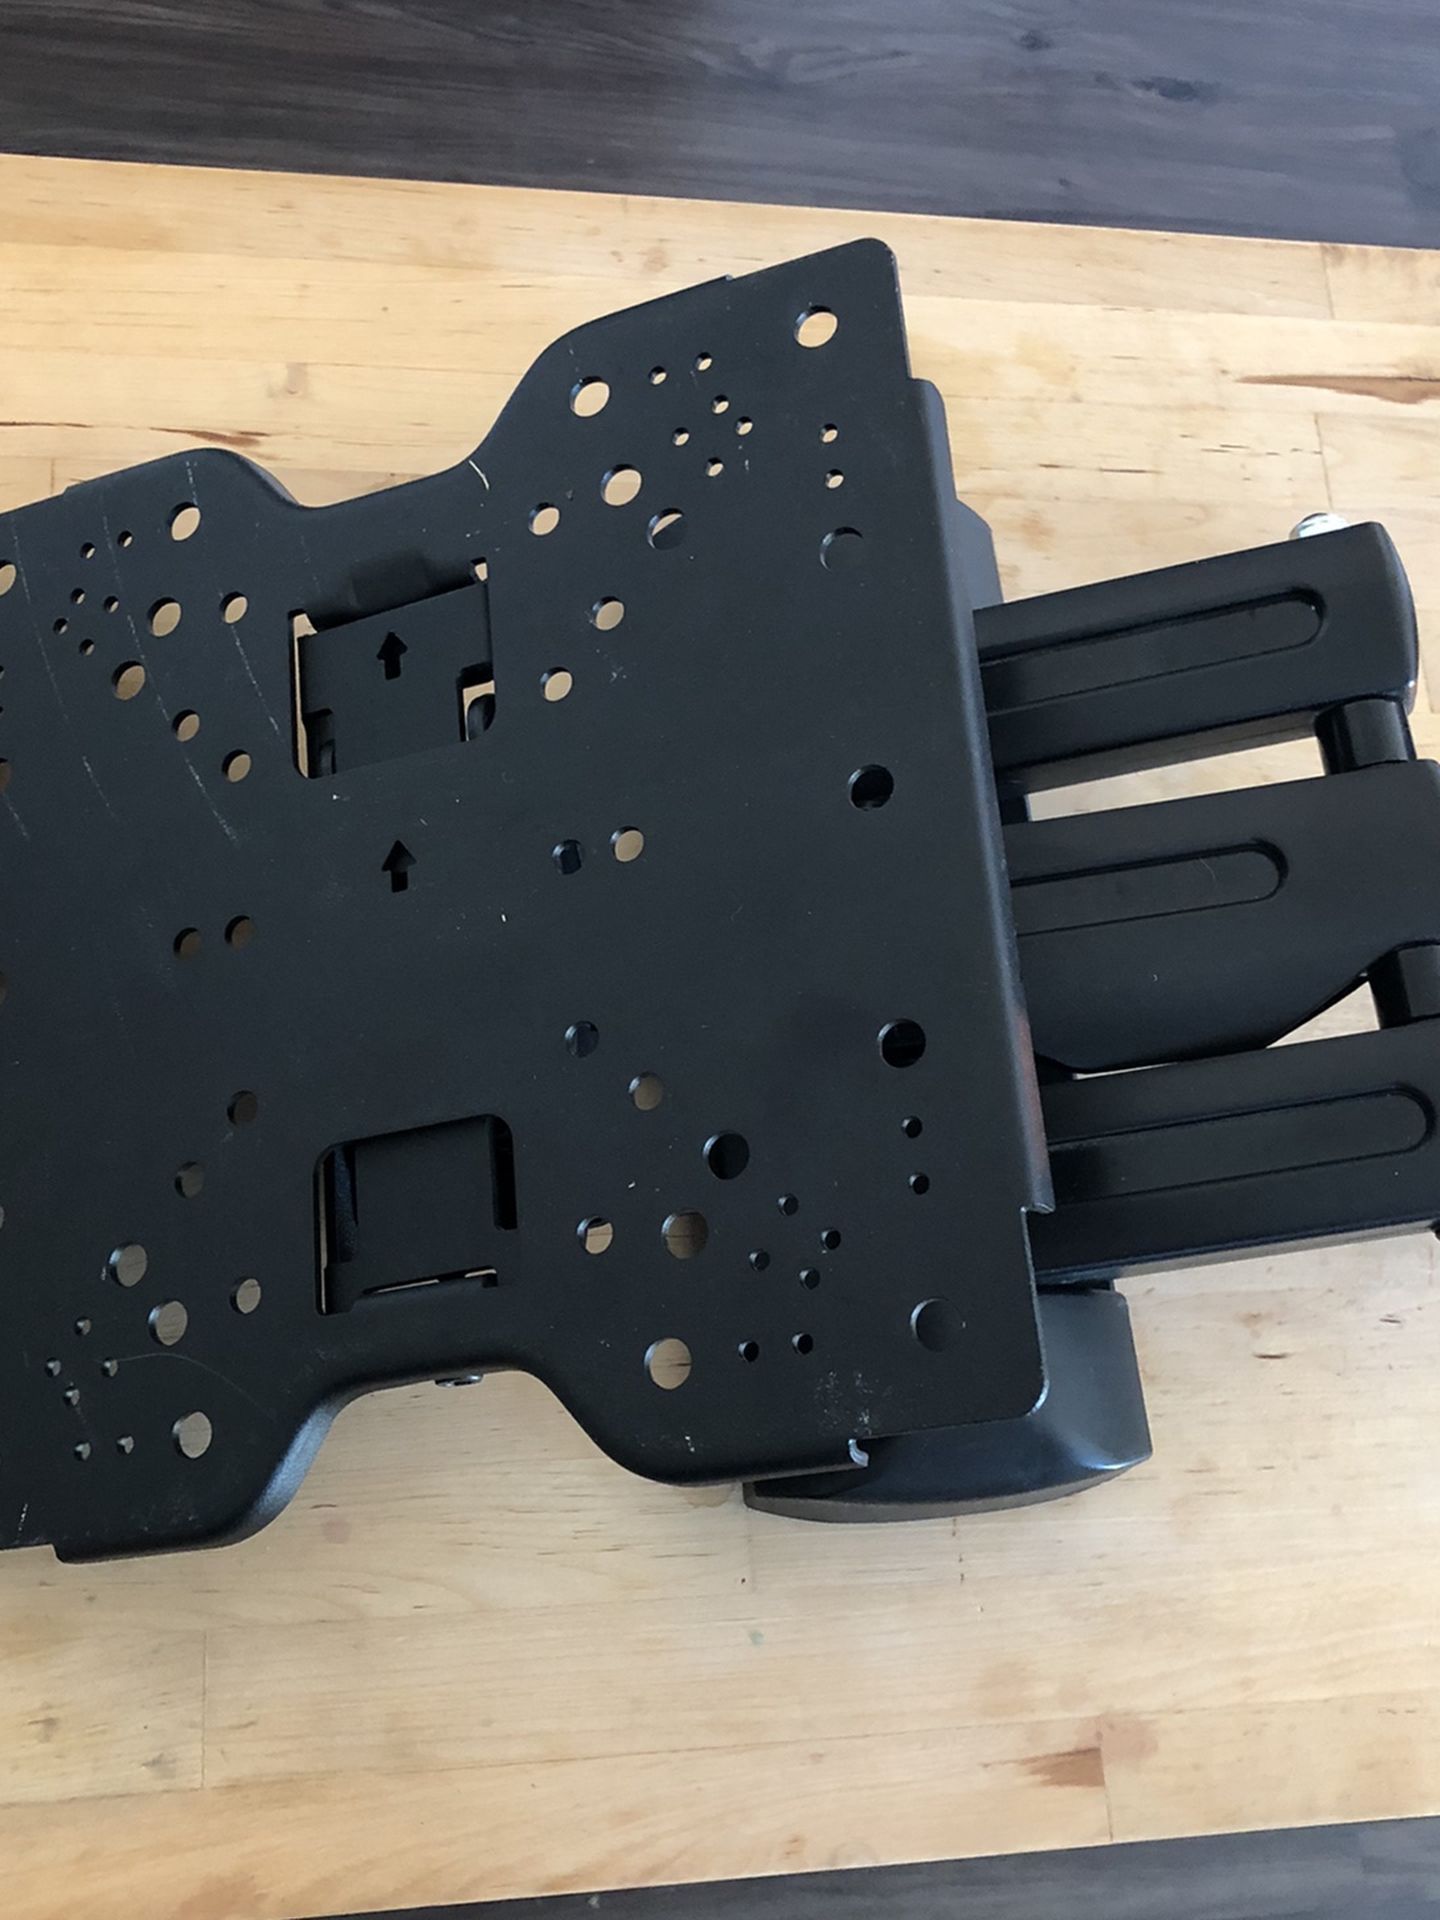 FULL MOTION ARTICULATING WALL MOUNT FOR TV